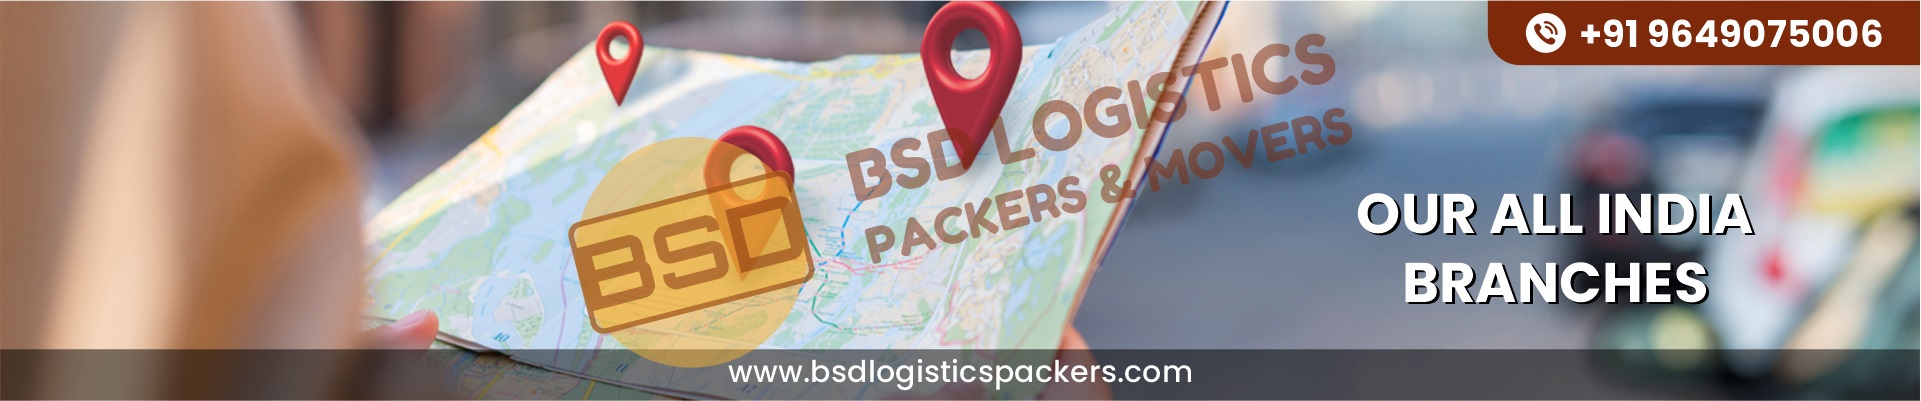 BSD Logistics Packers And Movers Locations